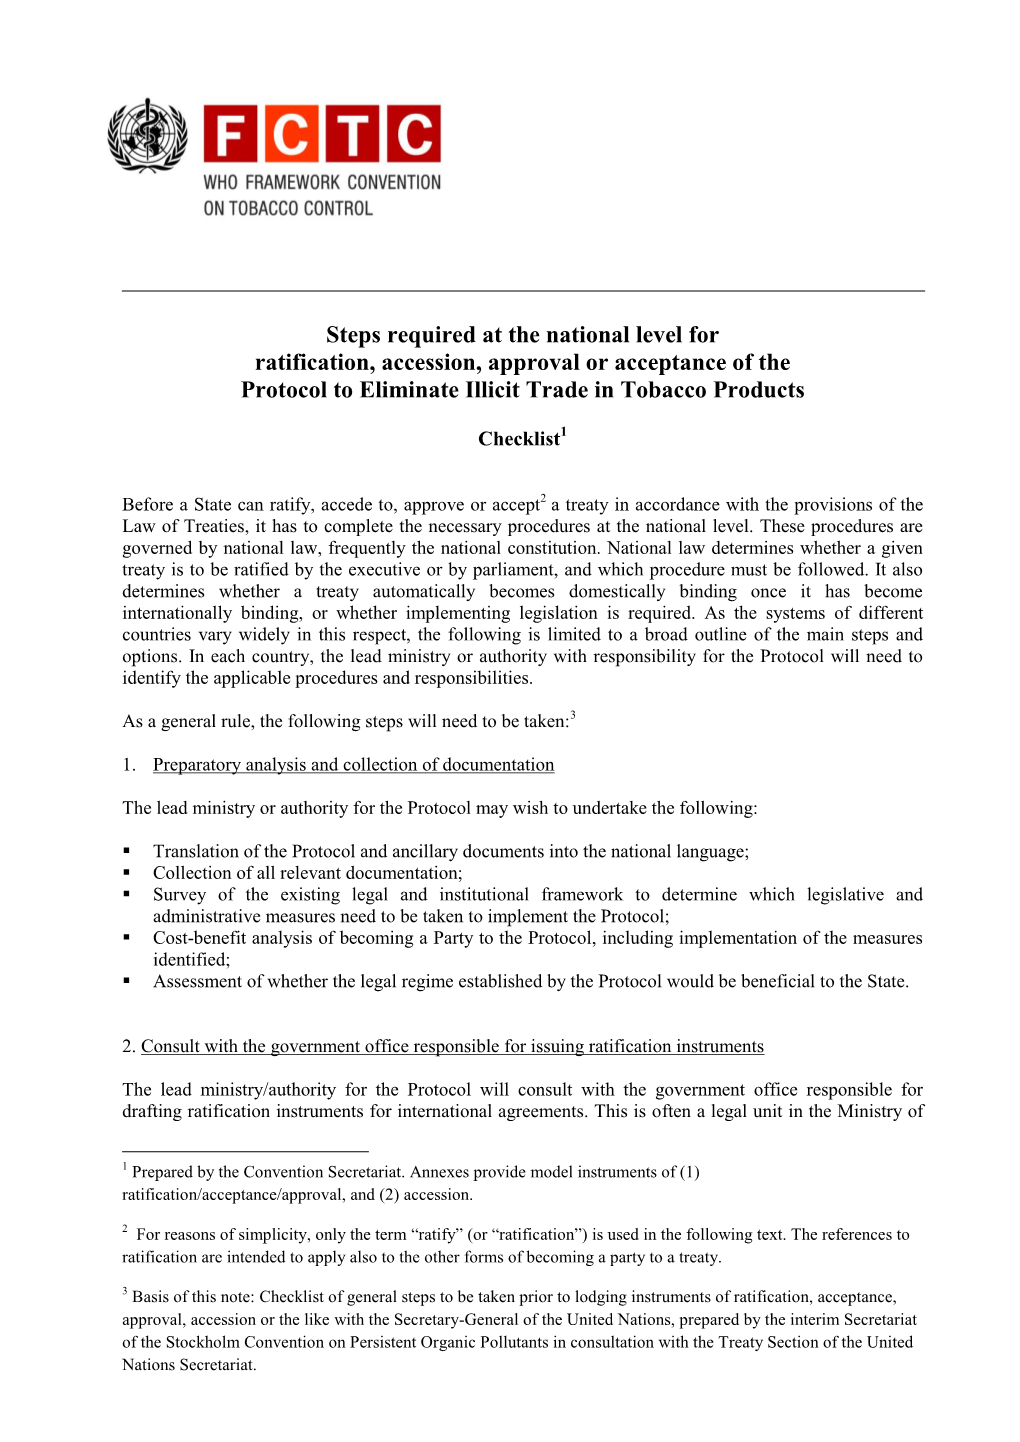 Steps Required at the National Level for Ratification, Accession, Approval Or Acceptance of the Protocol to Eliminate Illicit Trade in Tobacco Products